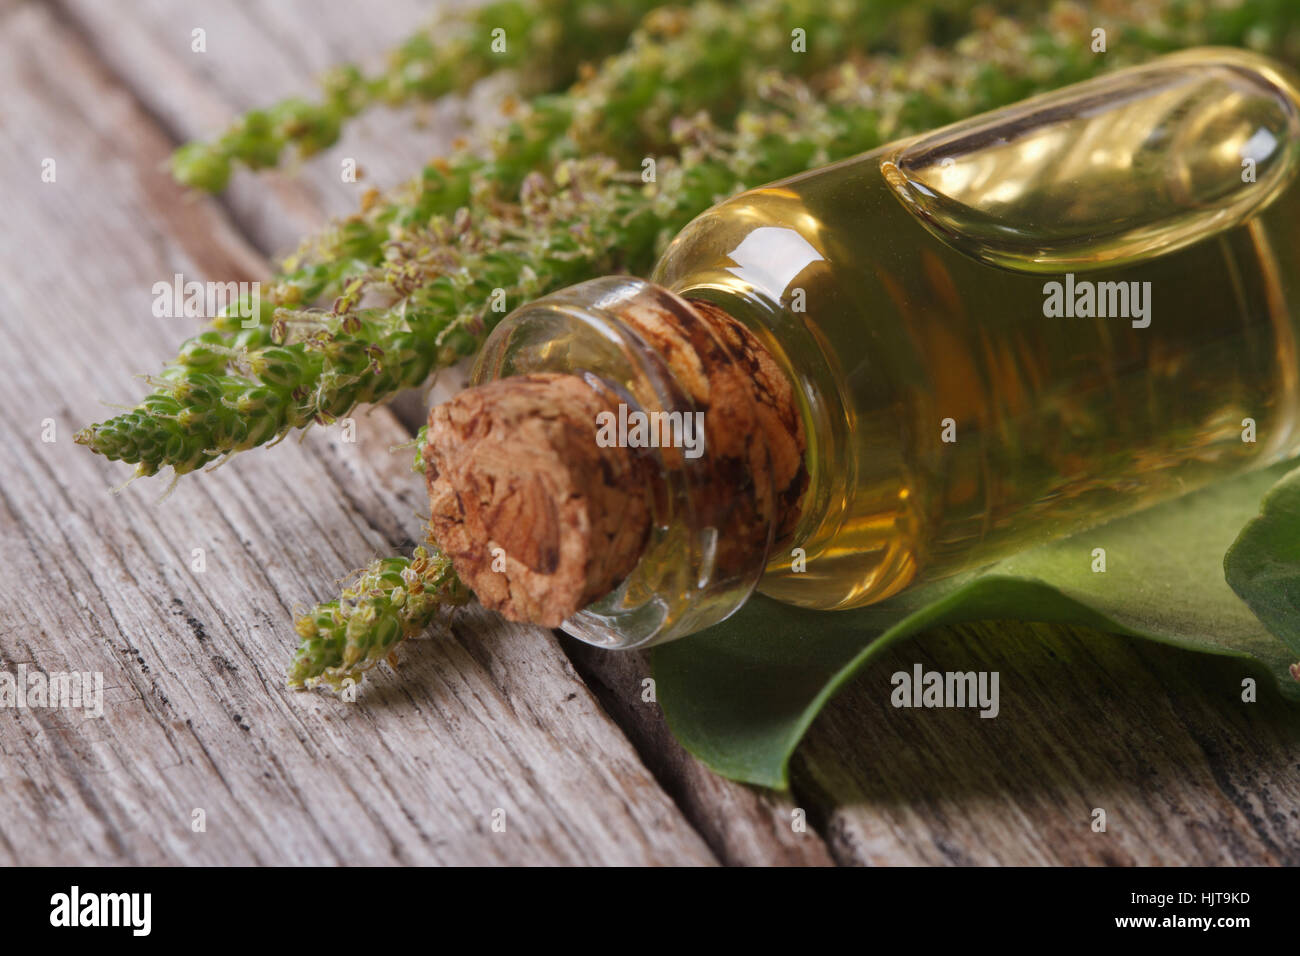 Extract of plantain in a glass bottle on a wooden table macro horizontal Stock Photo